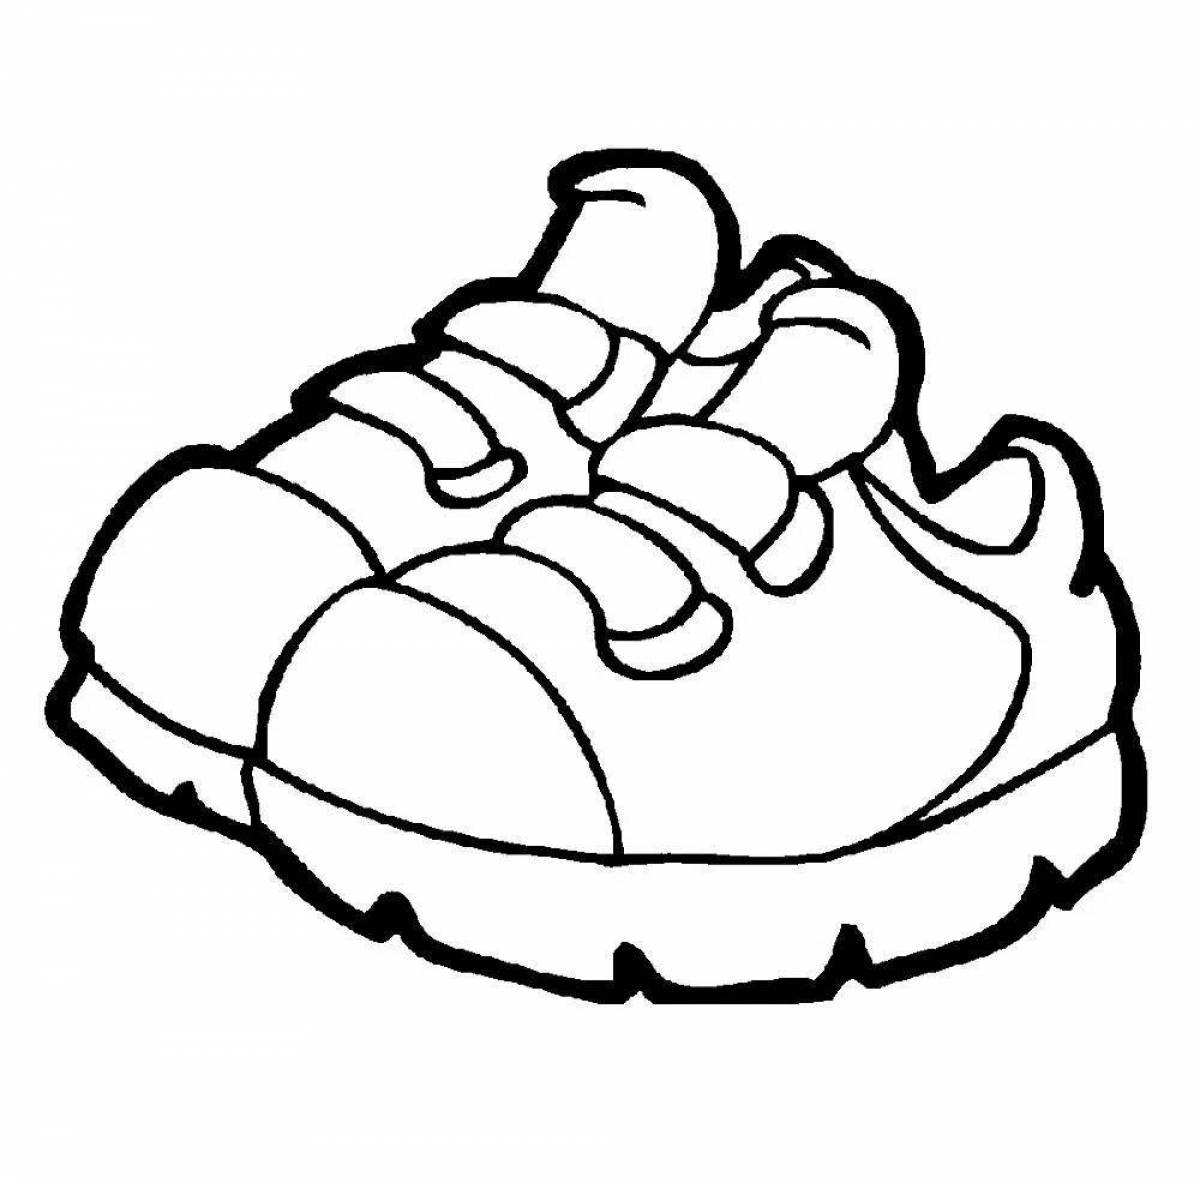 Attractive sneakers coloring book for babies